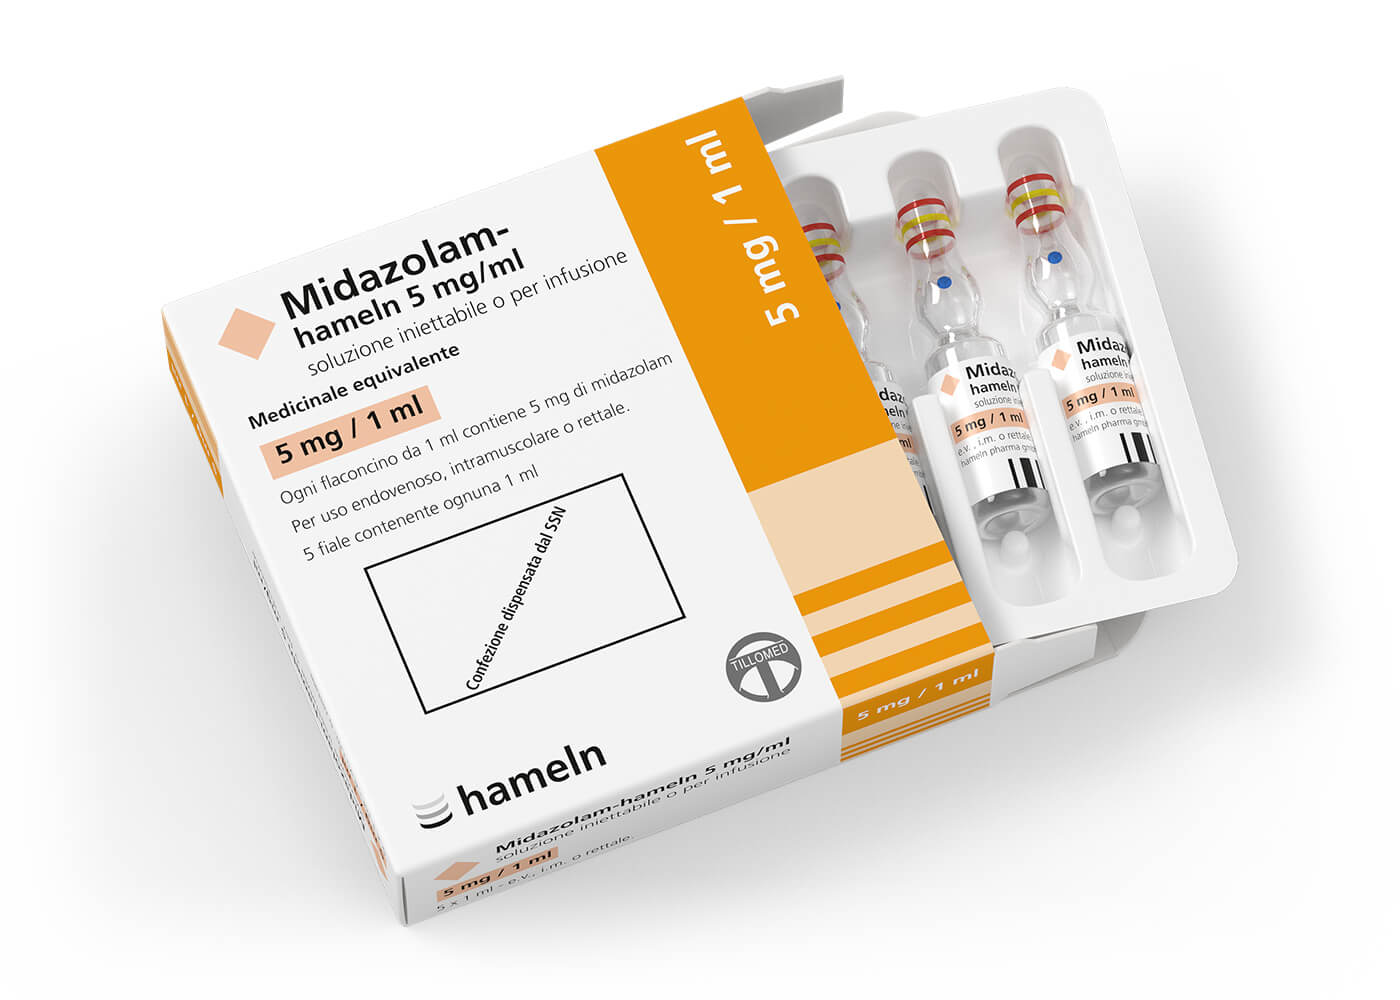 Midazolam_IT_5_mg-ml_in_1_ml_Pack-Amp_5St_2020-25